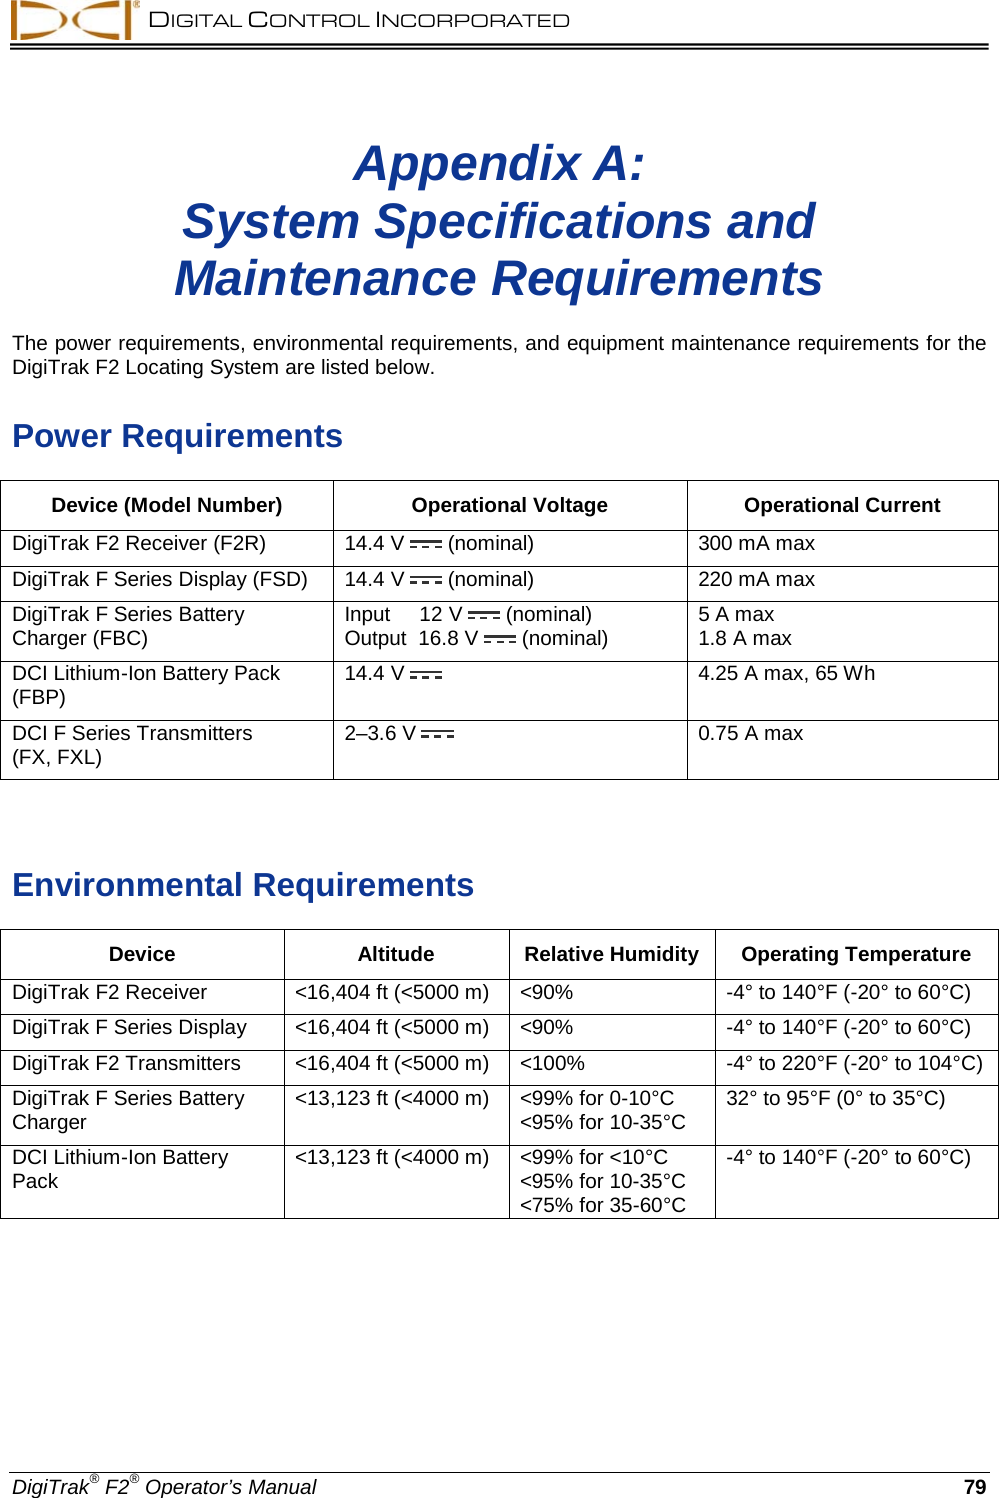  DIGITAL CONTROL INCORPORATED  DigiTrak® F2® Operator’s Manual 79 Appendix A: System Specifications and  Maintenance Requirements  The power requirements, environmental requirements, and equipment maintenance requirements for the DigiTrak F2 Locating System are listed below. Power Requirements Device (Model Number) Operational Voltage Operational Current DigiTrak F2 Receiver (F2R) 14.4 V  (nominal) 300 mA max DigiTrak F Series Display (FSD) 14.4 V  (nominal) 220 mA max DigiTrak F Series Battery Charger (FBC) Input     12 V  (nominal) Output  16.8 V  (nominal) 5 A max 1.8 A max  DCI Lithium-Ion Battery Pack (FBP) 14.4 V  4.25 A max, 65 Wh  DCI F Series Transmitters  (FX, FXL) 2–3.6 V  0.75 A max   Environmental Requirements Device Altitude Relative Humidity Operating Temperature DigiTrak F2 Receiver &lt;16,404 ft (&lt;5000 m) &lt;90% -4° to 140°F (-20° to 60°C) DigiTrak F Series Display &lt;16,404 ft (&lt;5000 m) &lt;90% -4° to 140°F (-20° to 60°C) DigiTrak F2 Transmitters &lt;16,404 ft (&lt;5000 m) &lt;100% -4° to 220°F (-20° to 104°C) DigiTrak F Series Battery Charger &lt;13,123 ft (&lt;4000 m) &lt;99% for 0-10°C &lt;95% for 10-35°C 32° to 95°F (0° to 35°C) DCI Lithium-Ion Battery Pack &lt;13,123 ft (&lt;4000 m) &lt;99% for &lt;10°C &lt;95% for 10-35°C &lt;75% for 35-60°C -4° to 140°F (-20° to 60°C)  